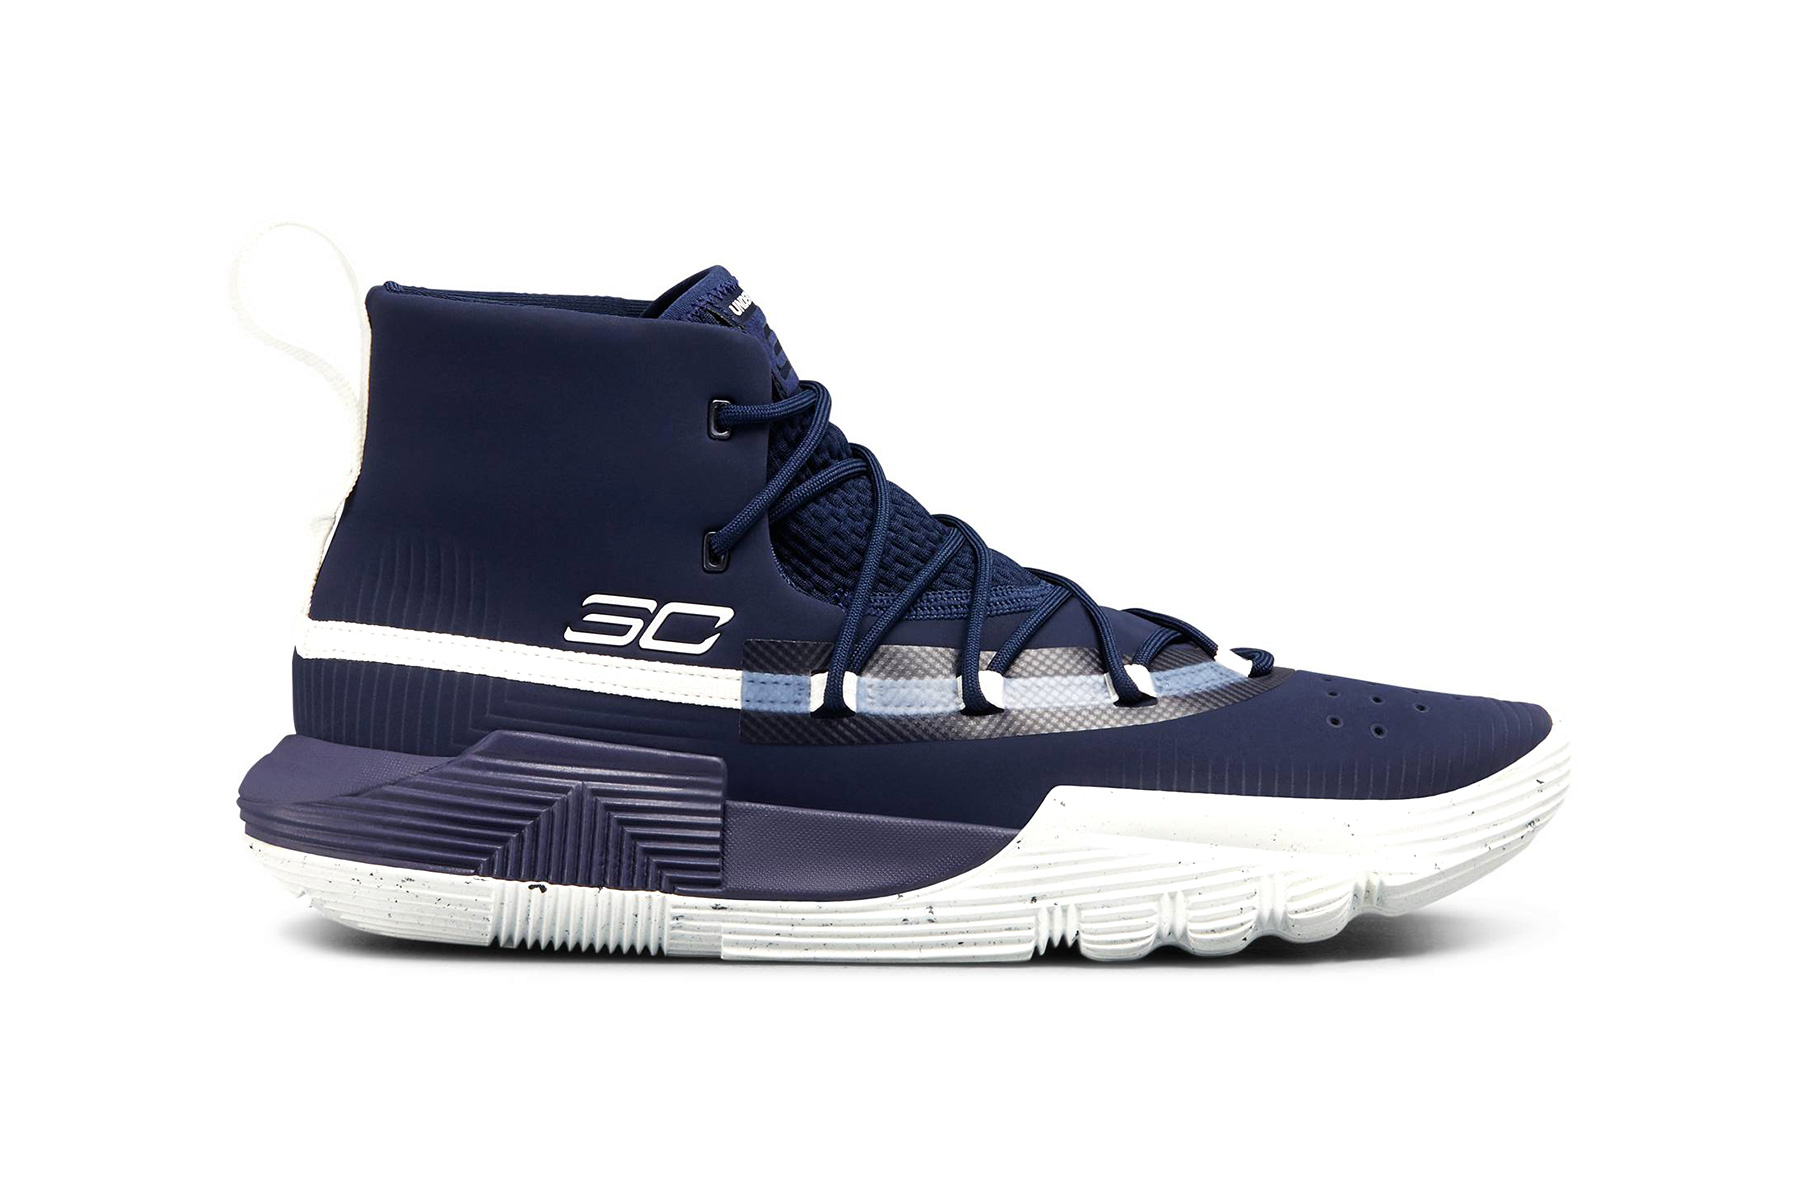 under armour sc 3zer0 3zero ii 2 steph stephen curry nba golden state warriors footwear 2018 basketball midnight navy white red sneakers